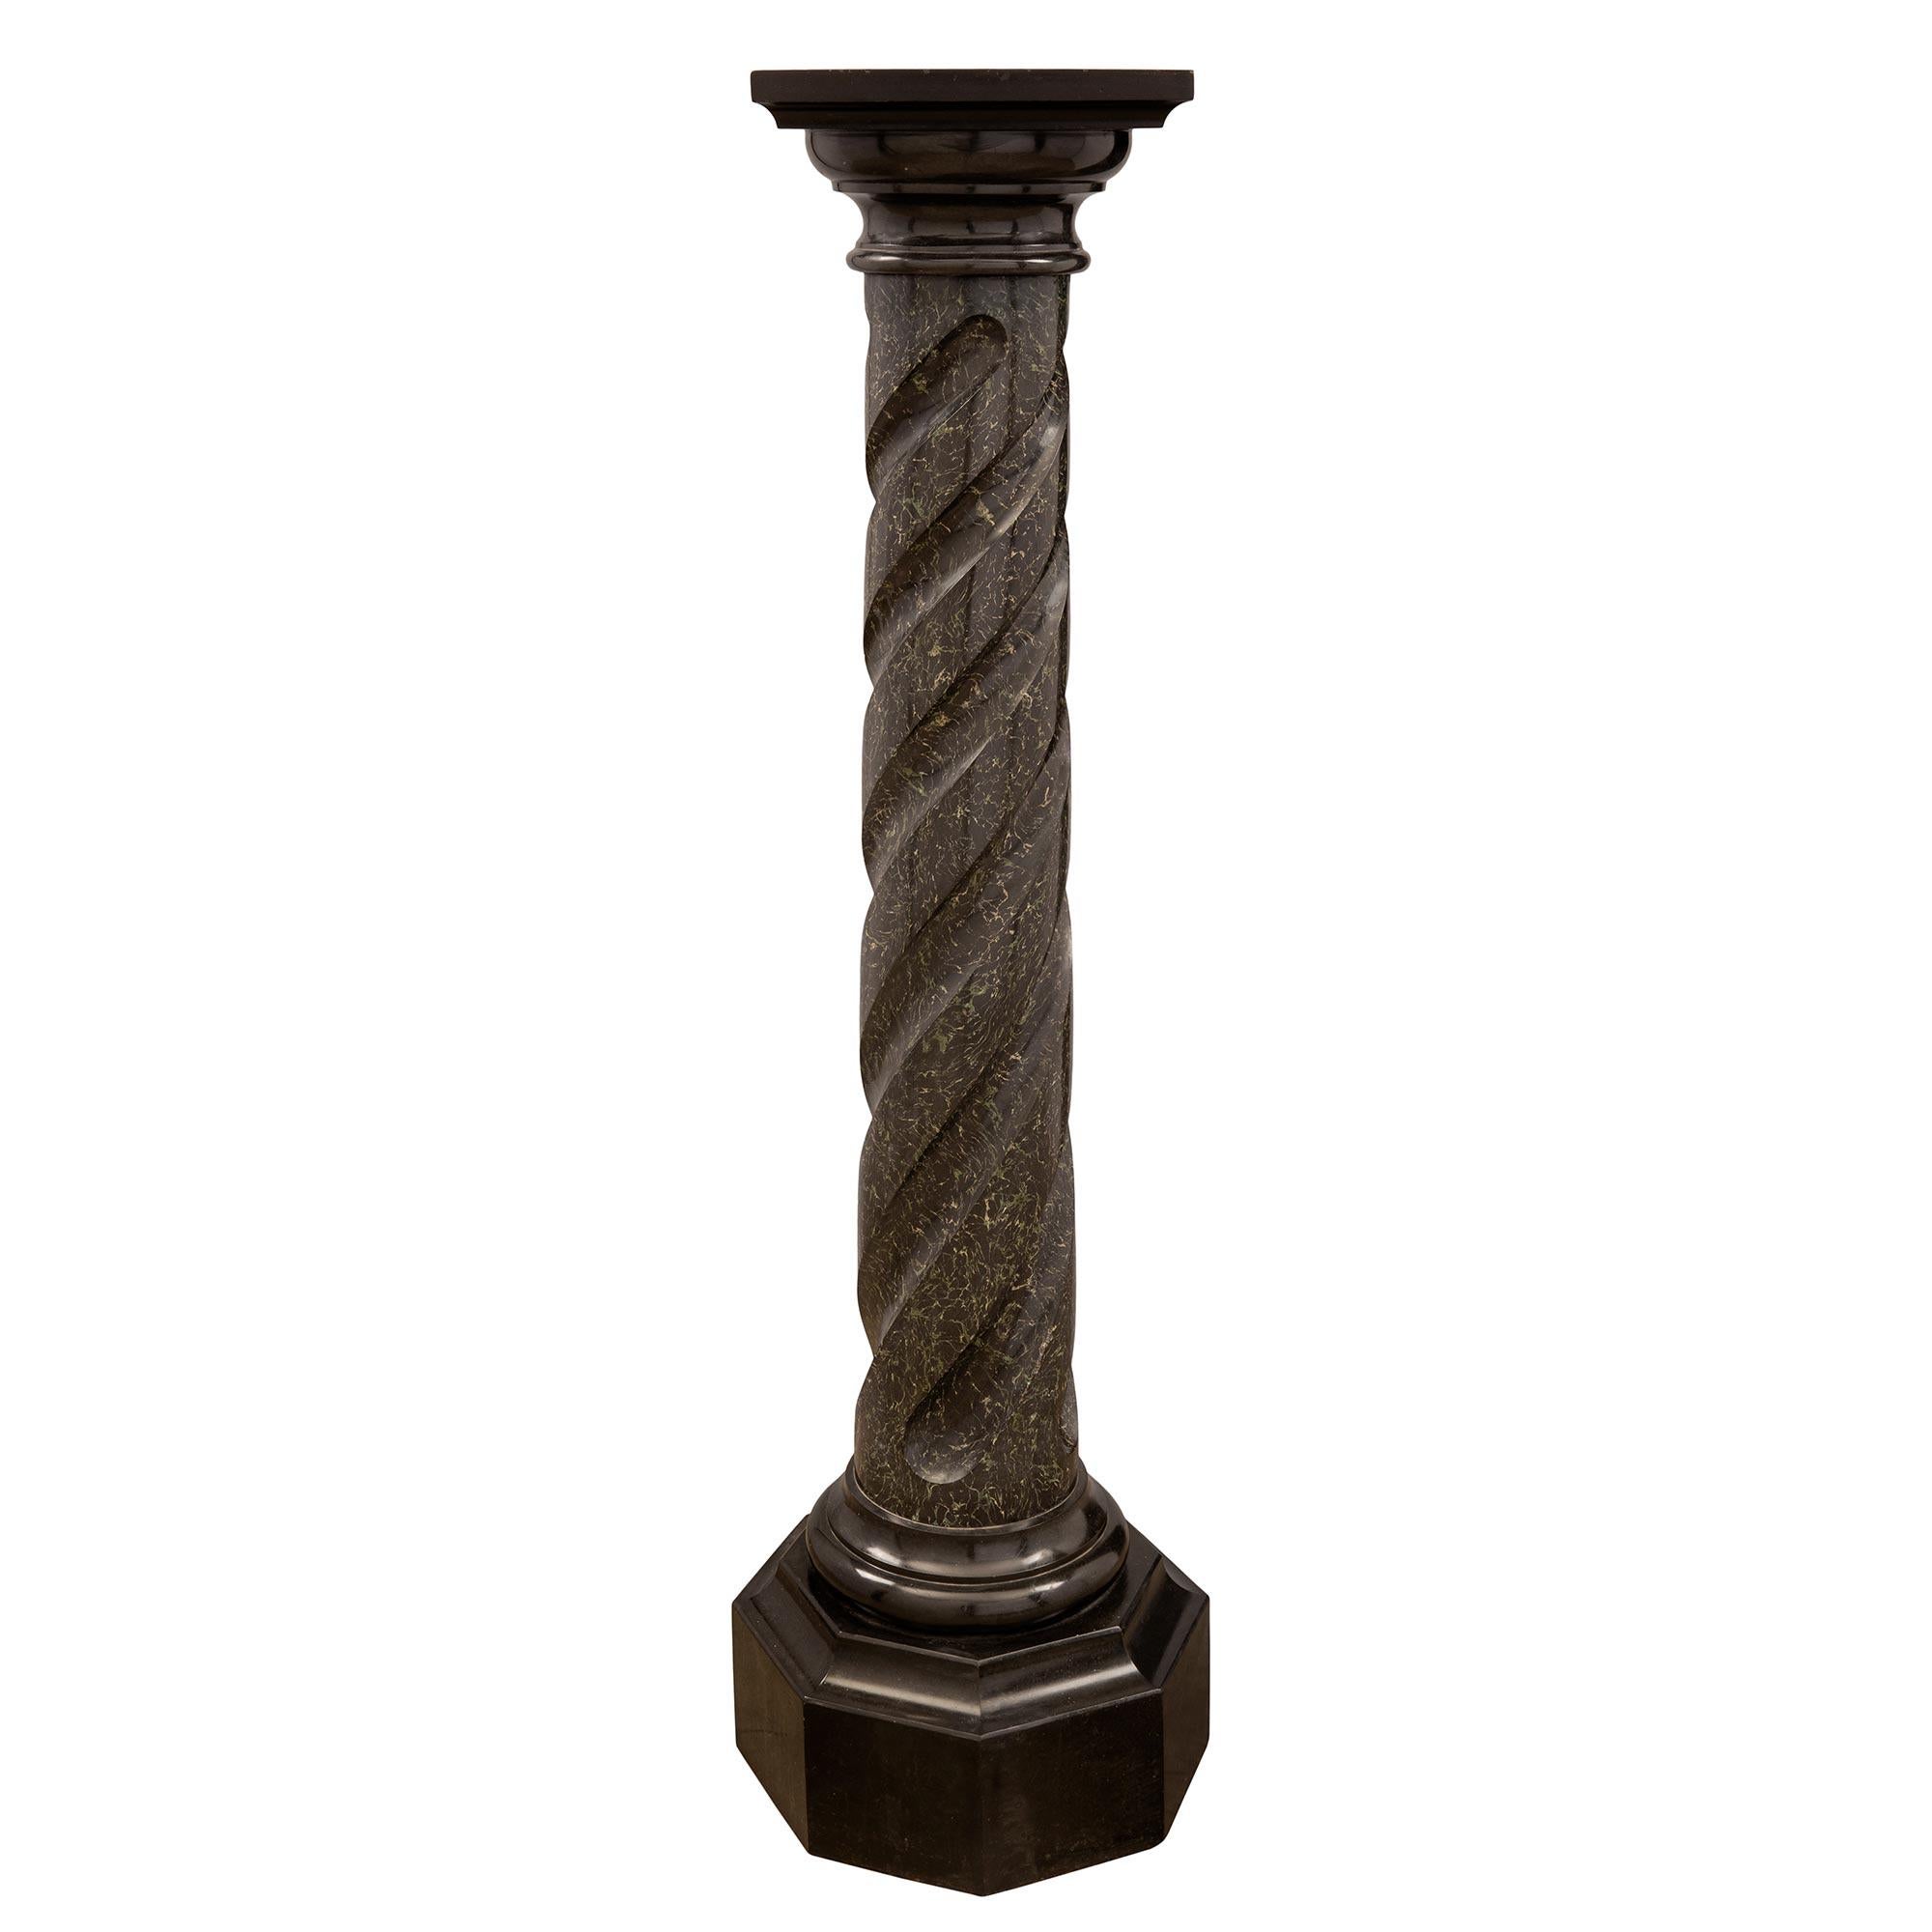 A fine pair of Italian 19th century Louis XVI st. Scagliola and Black Belgian marble columns. Each column is raised by a octagonal Black Belgian marble base below elegant mottled socle pedestals. The circular Scagliola central supports display